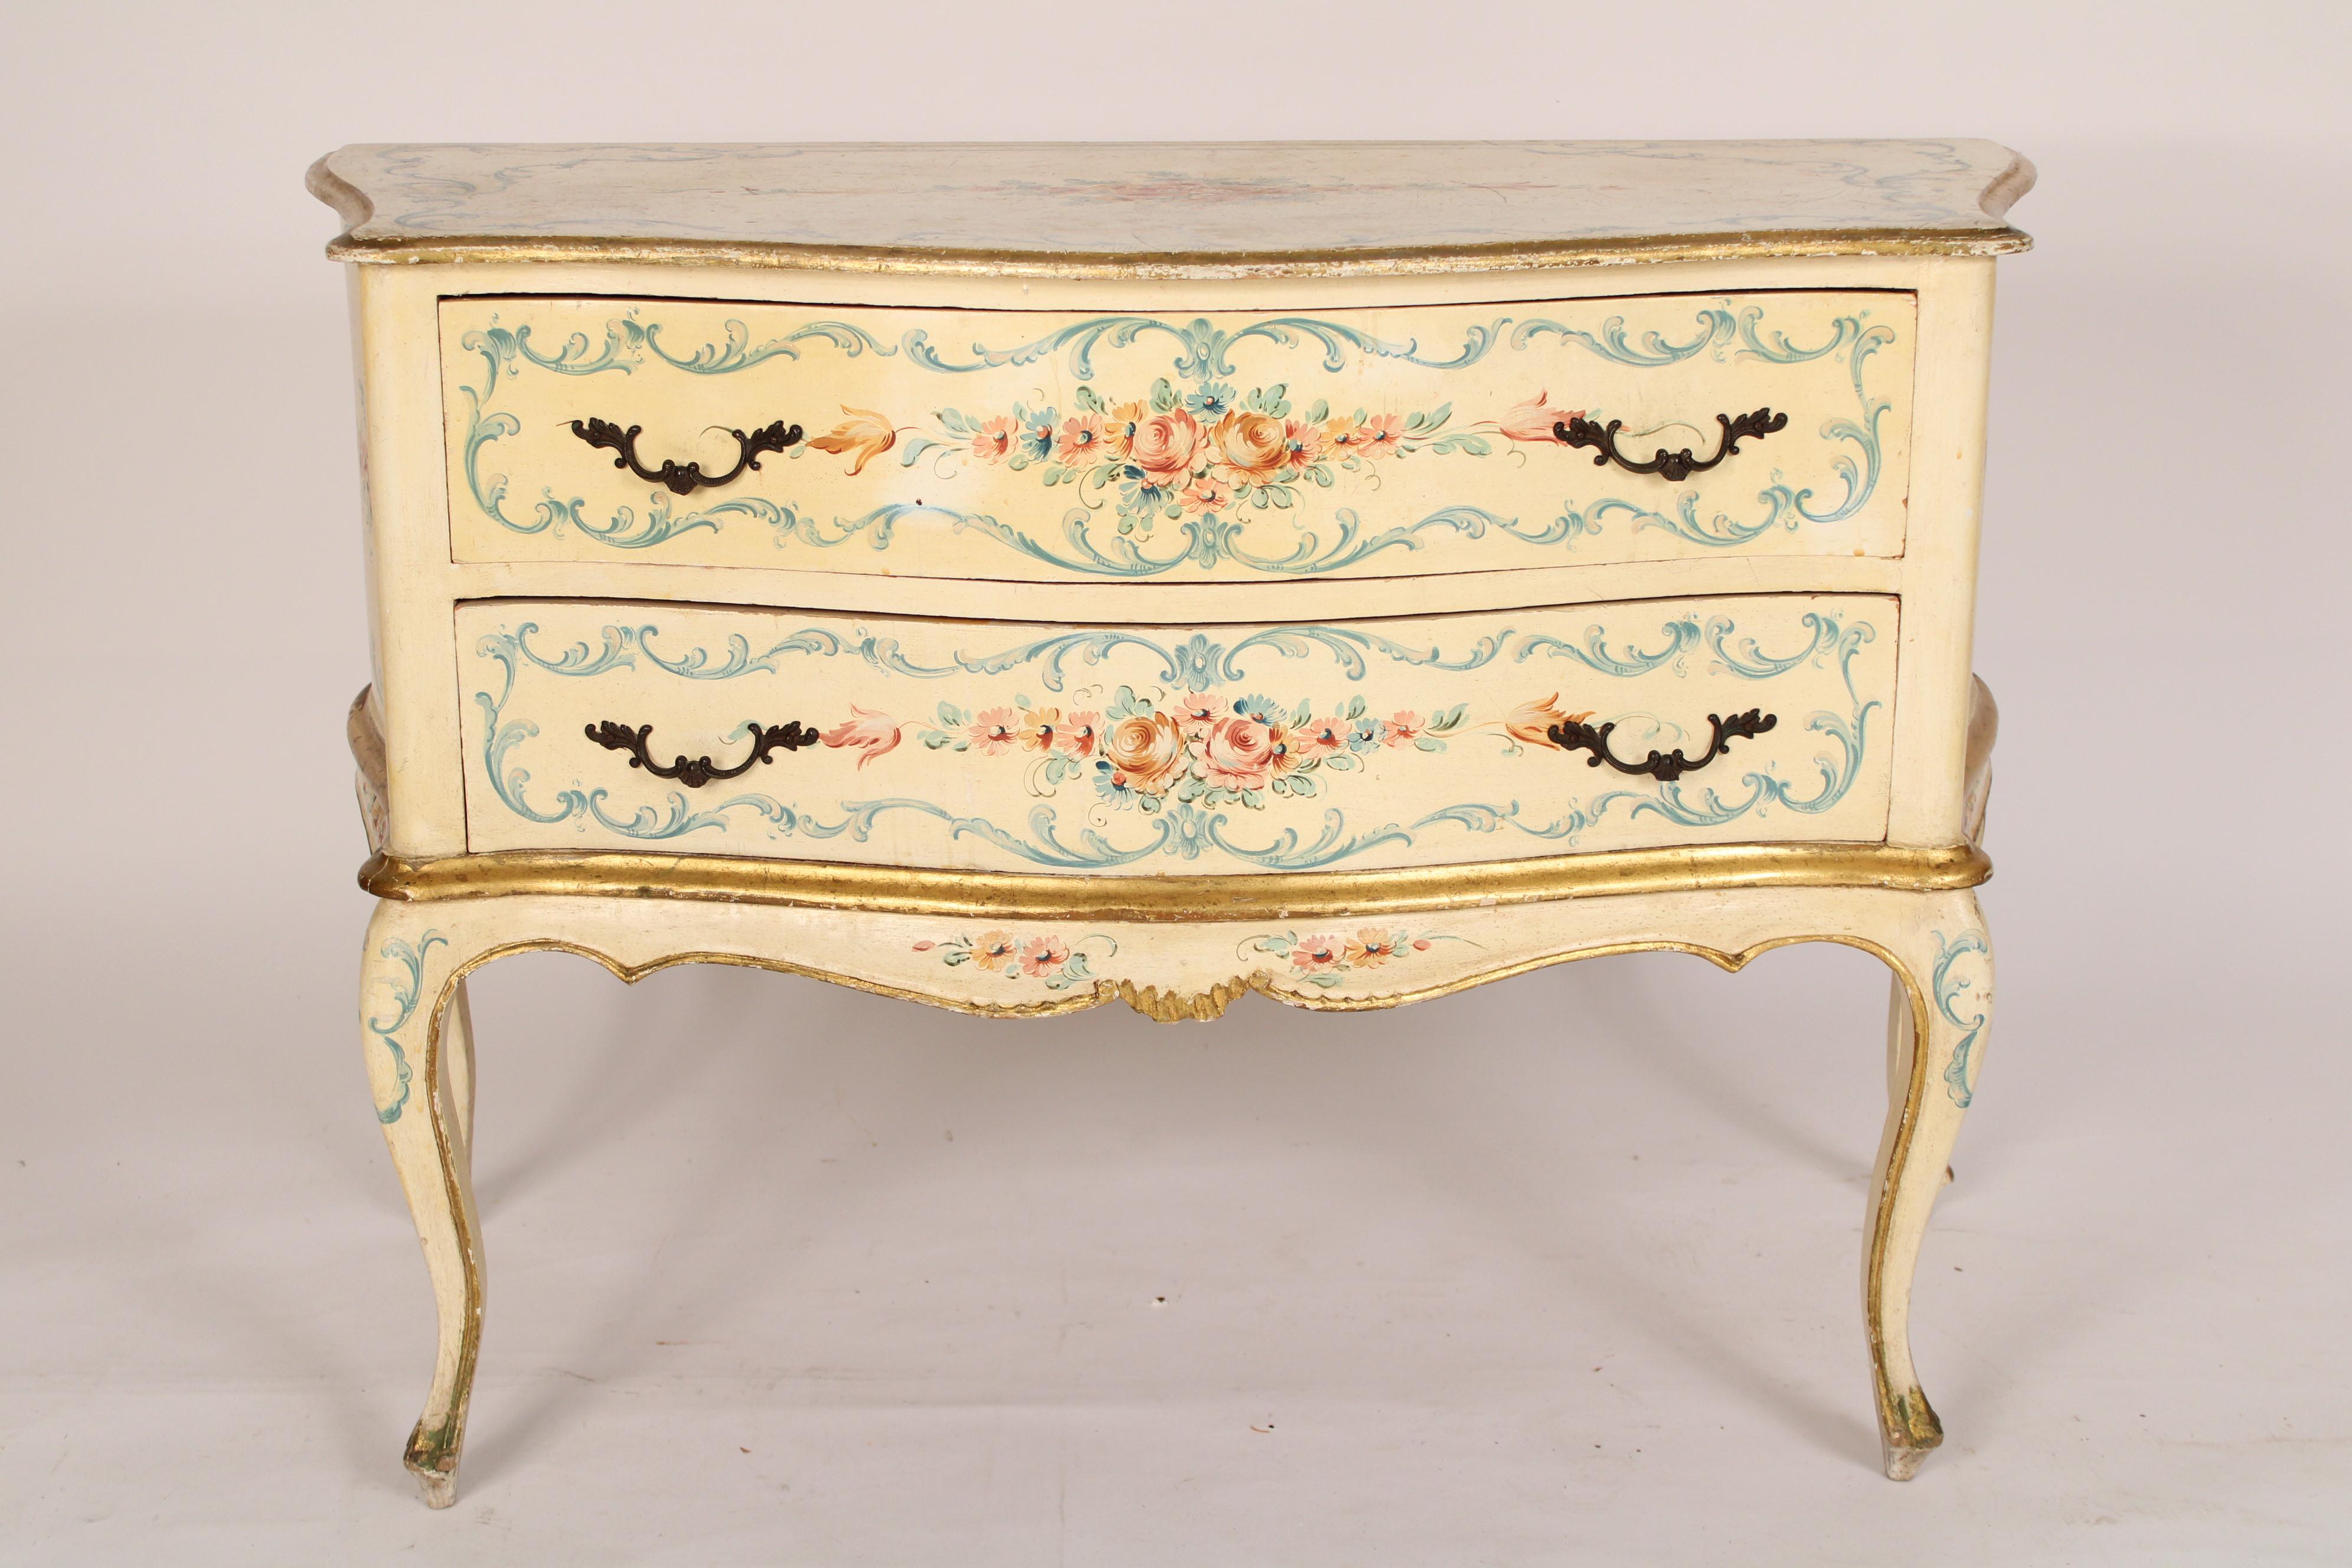 Italian Louis XV style painted and partial gilt chest of drawers, circa mid 20th century. The floral painted top with a serpentine front edge, thumb molded gilt decorated side and front edges, two floral painted serpentine shaped drawers with brass